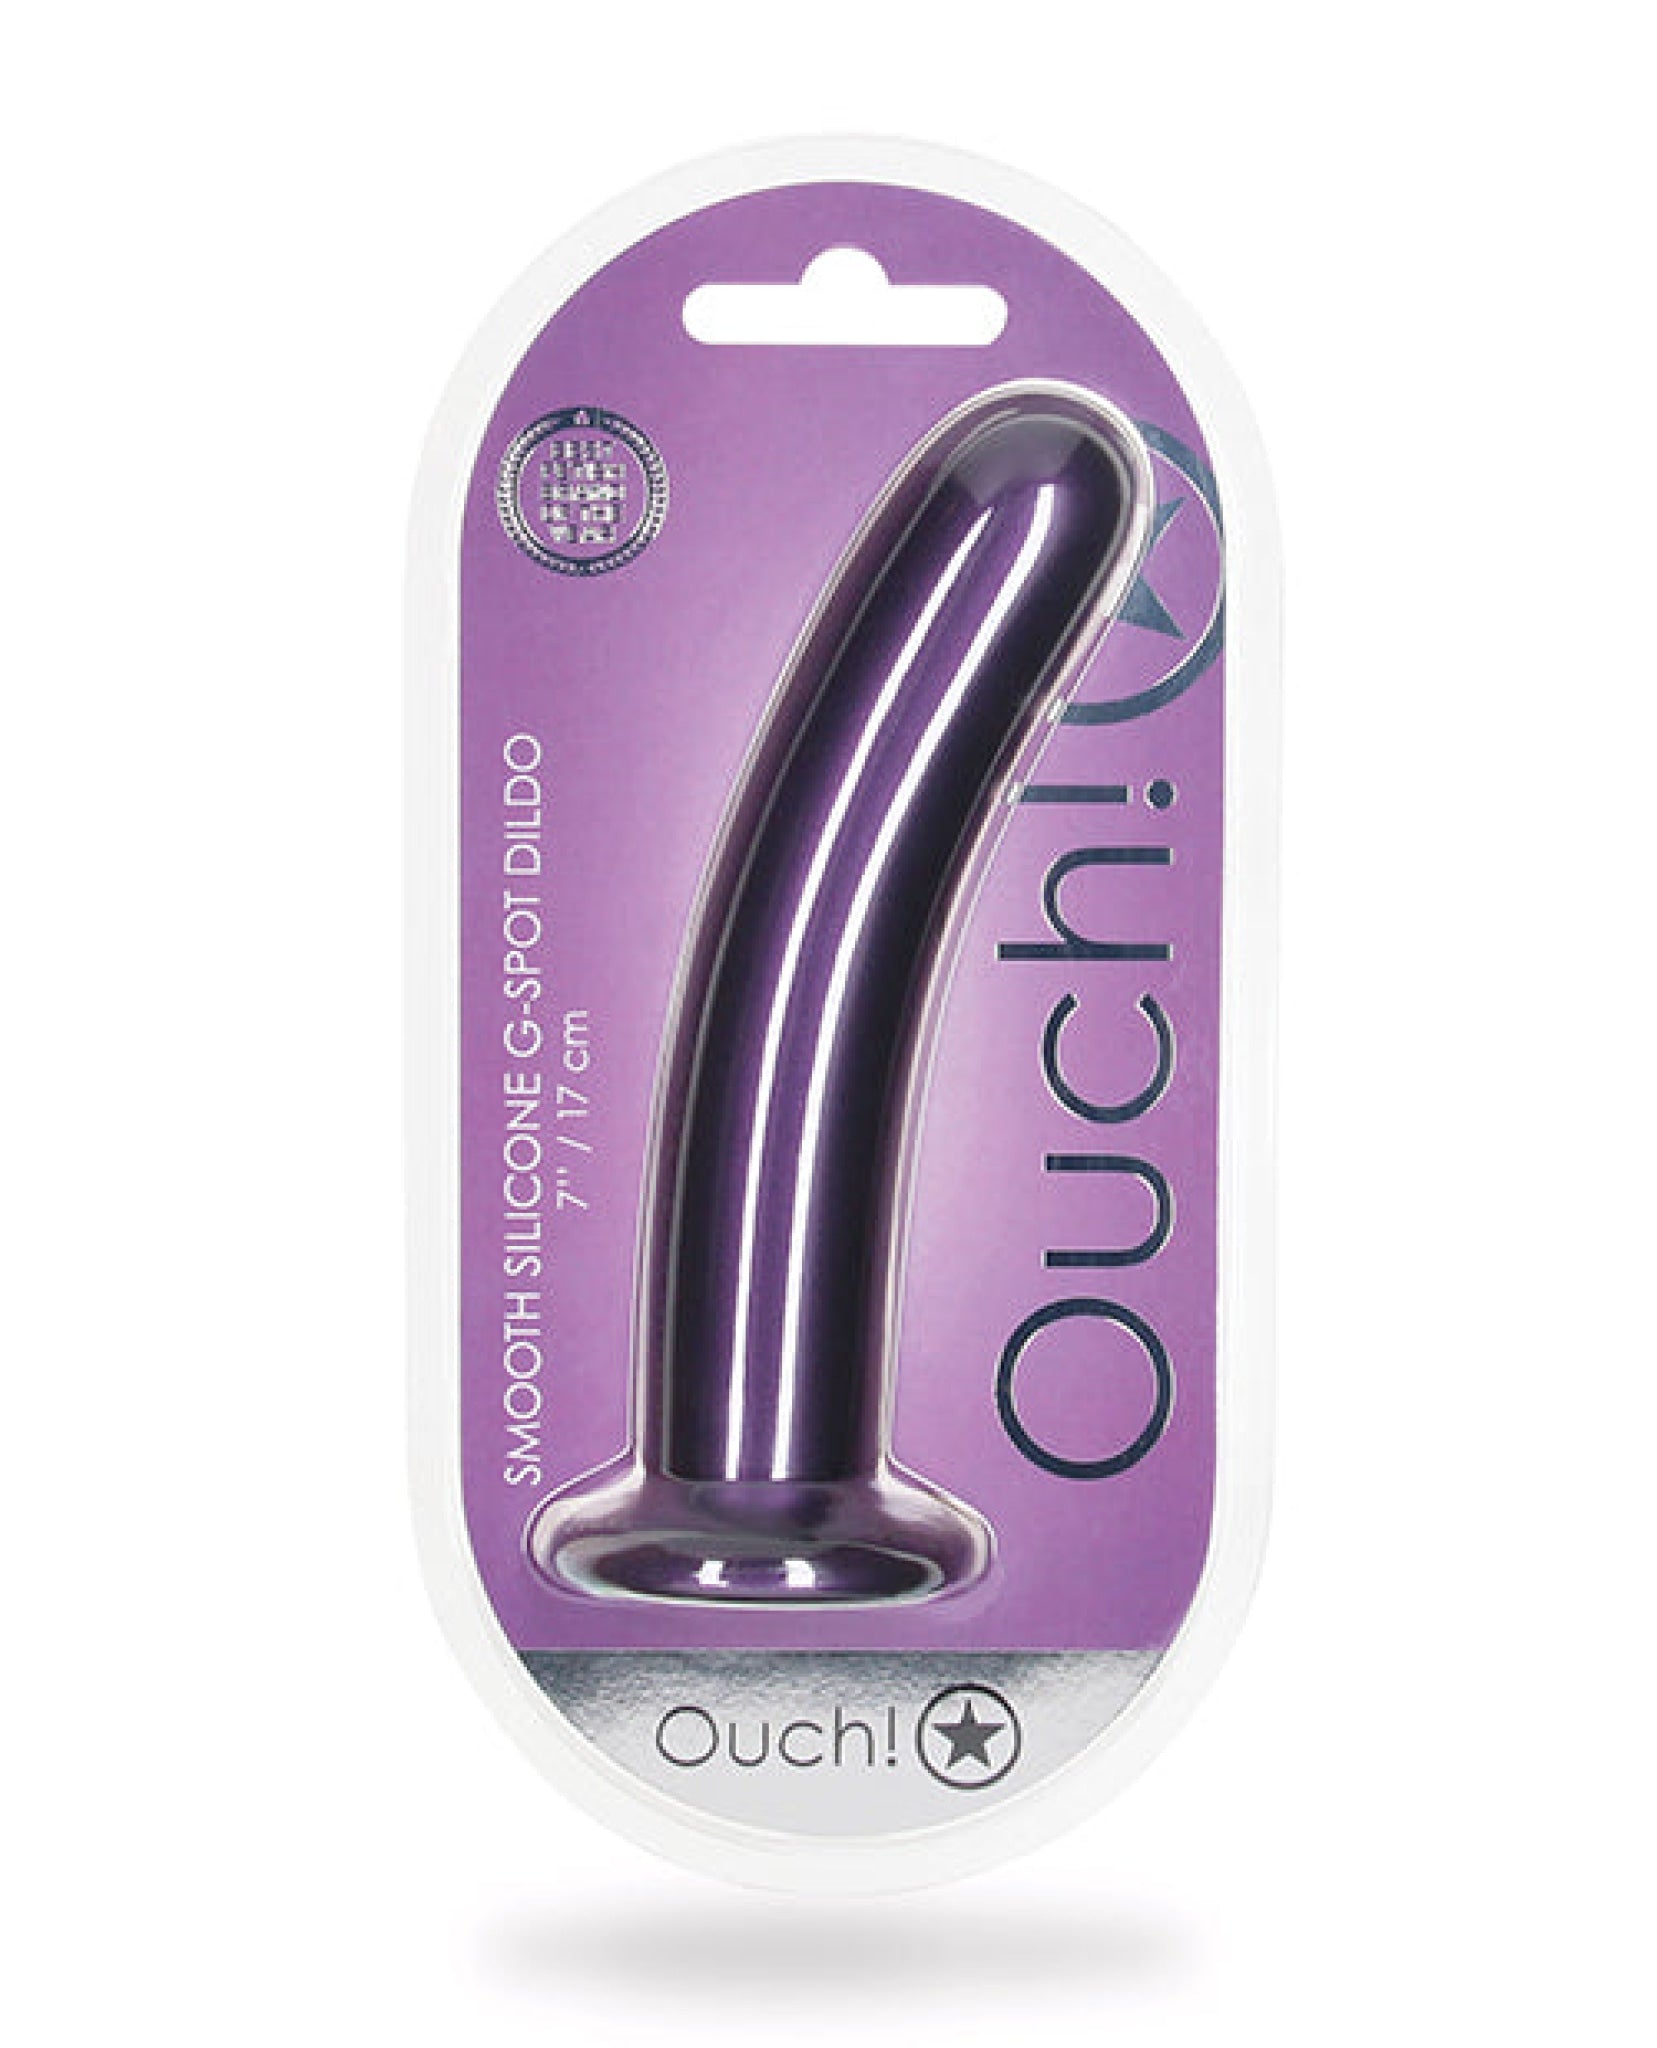 Shots Ouch 7" Smooth G-spot Dildo | Sex toys price tracker / tracking, Sex toys price history charts, Sextoys price, Sex toys price drop alerts